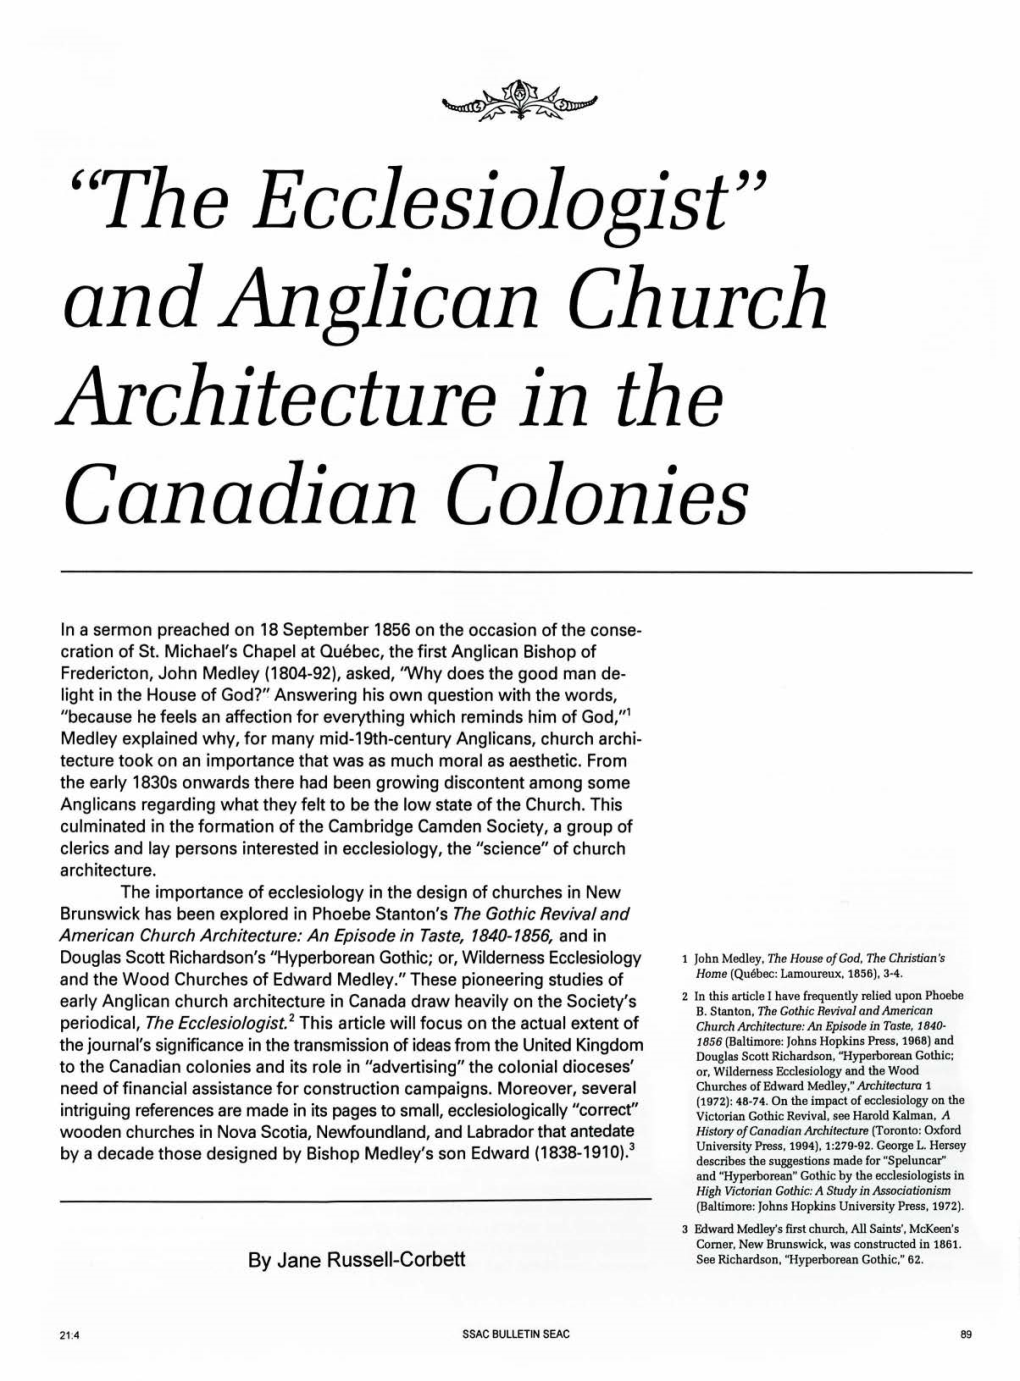 "The Ecclesiologist" and Anglican Church Architecture in the Canadian Colonies